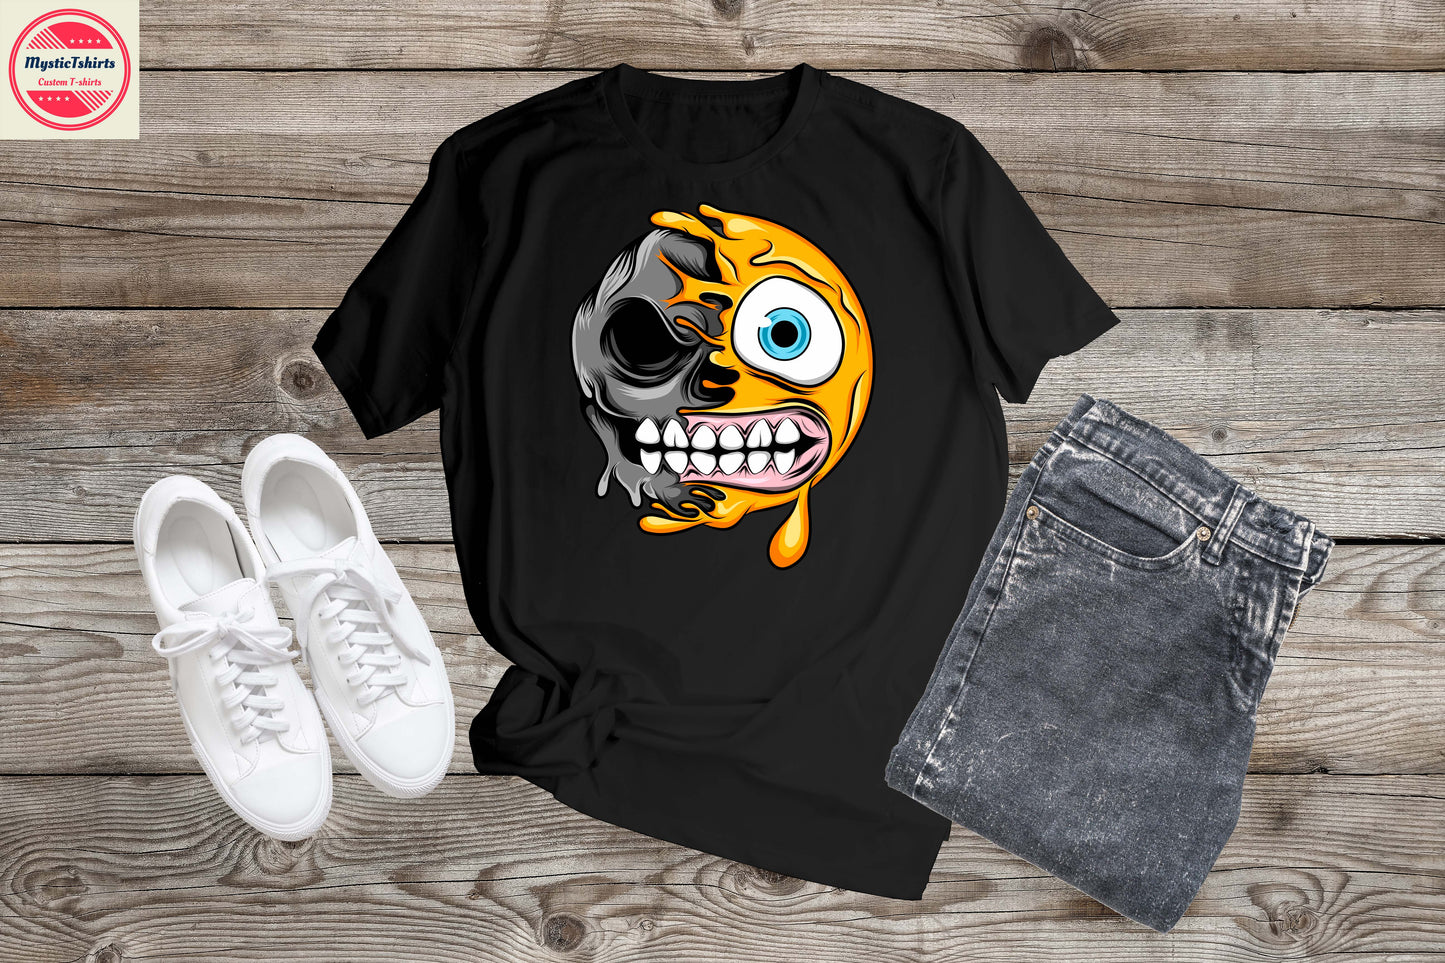 068. CRAZY FACE, Personalized T-Shirt, Custom Text, Make Your Own Shirt, Custom Tee